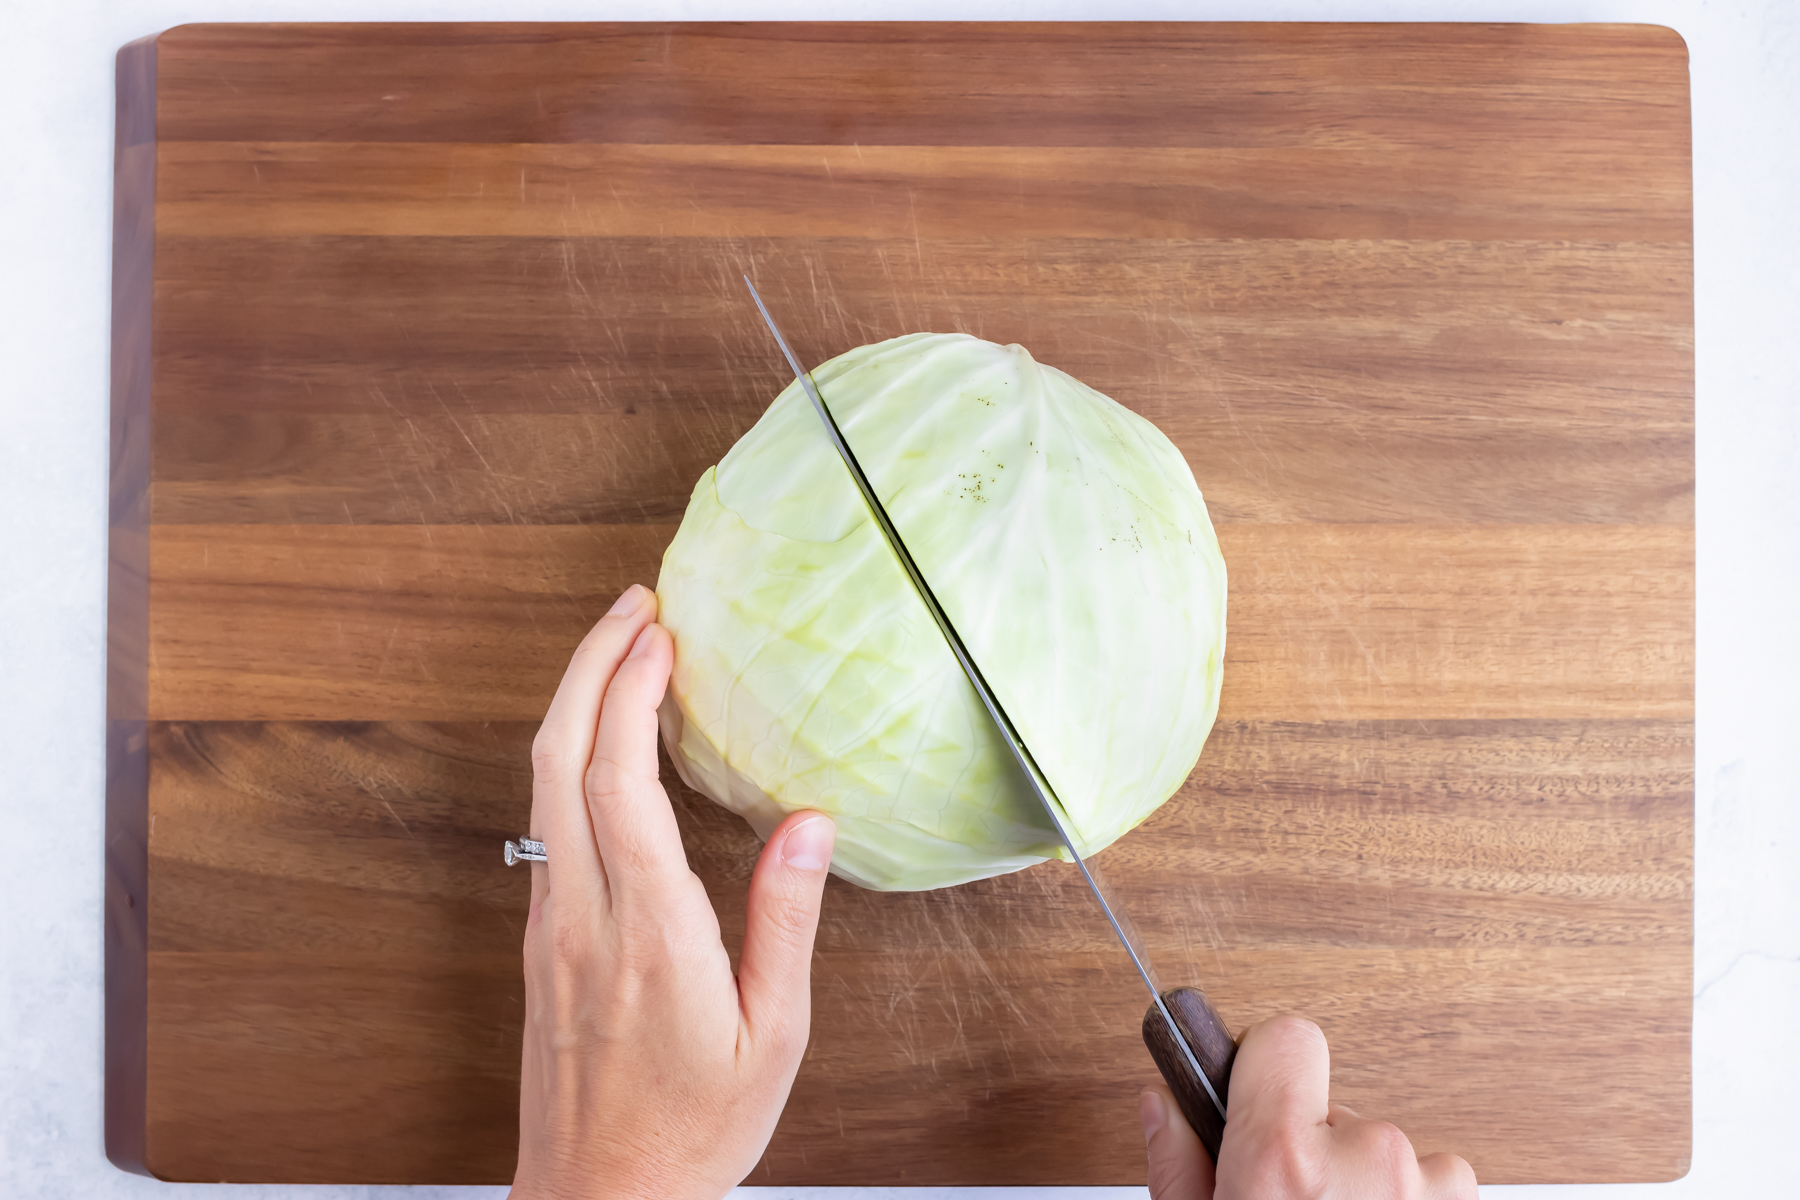 A head of cabbage with the stem side down on a cutting board being cut in half lengthwise.